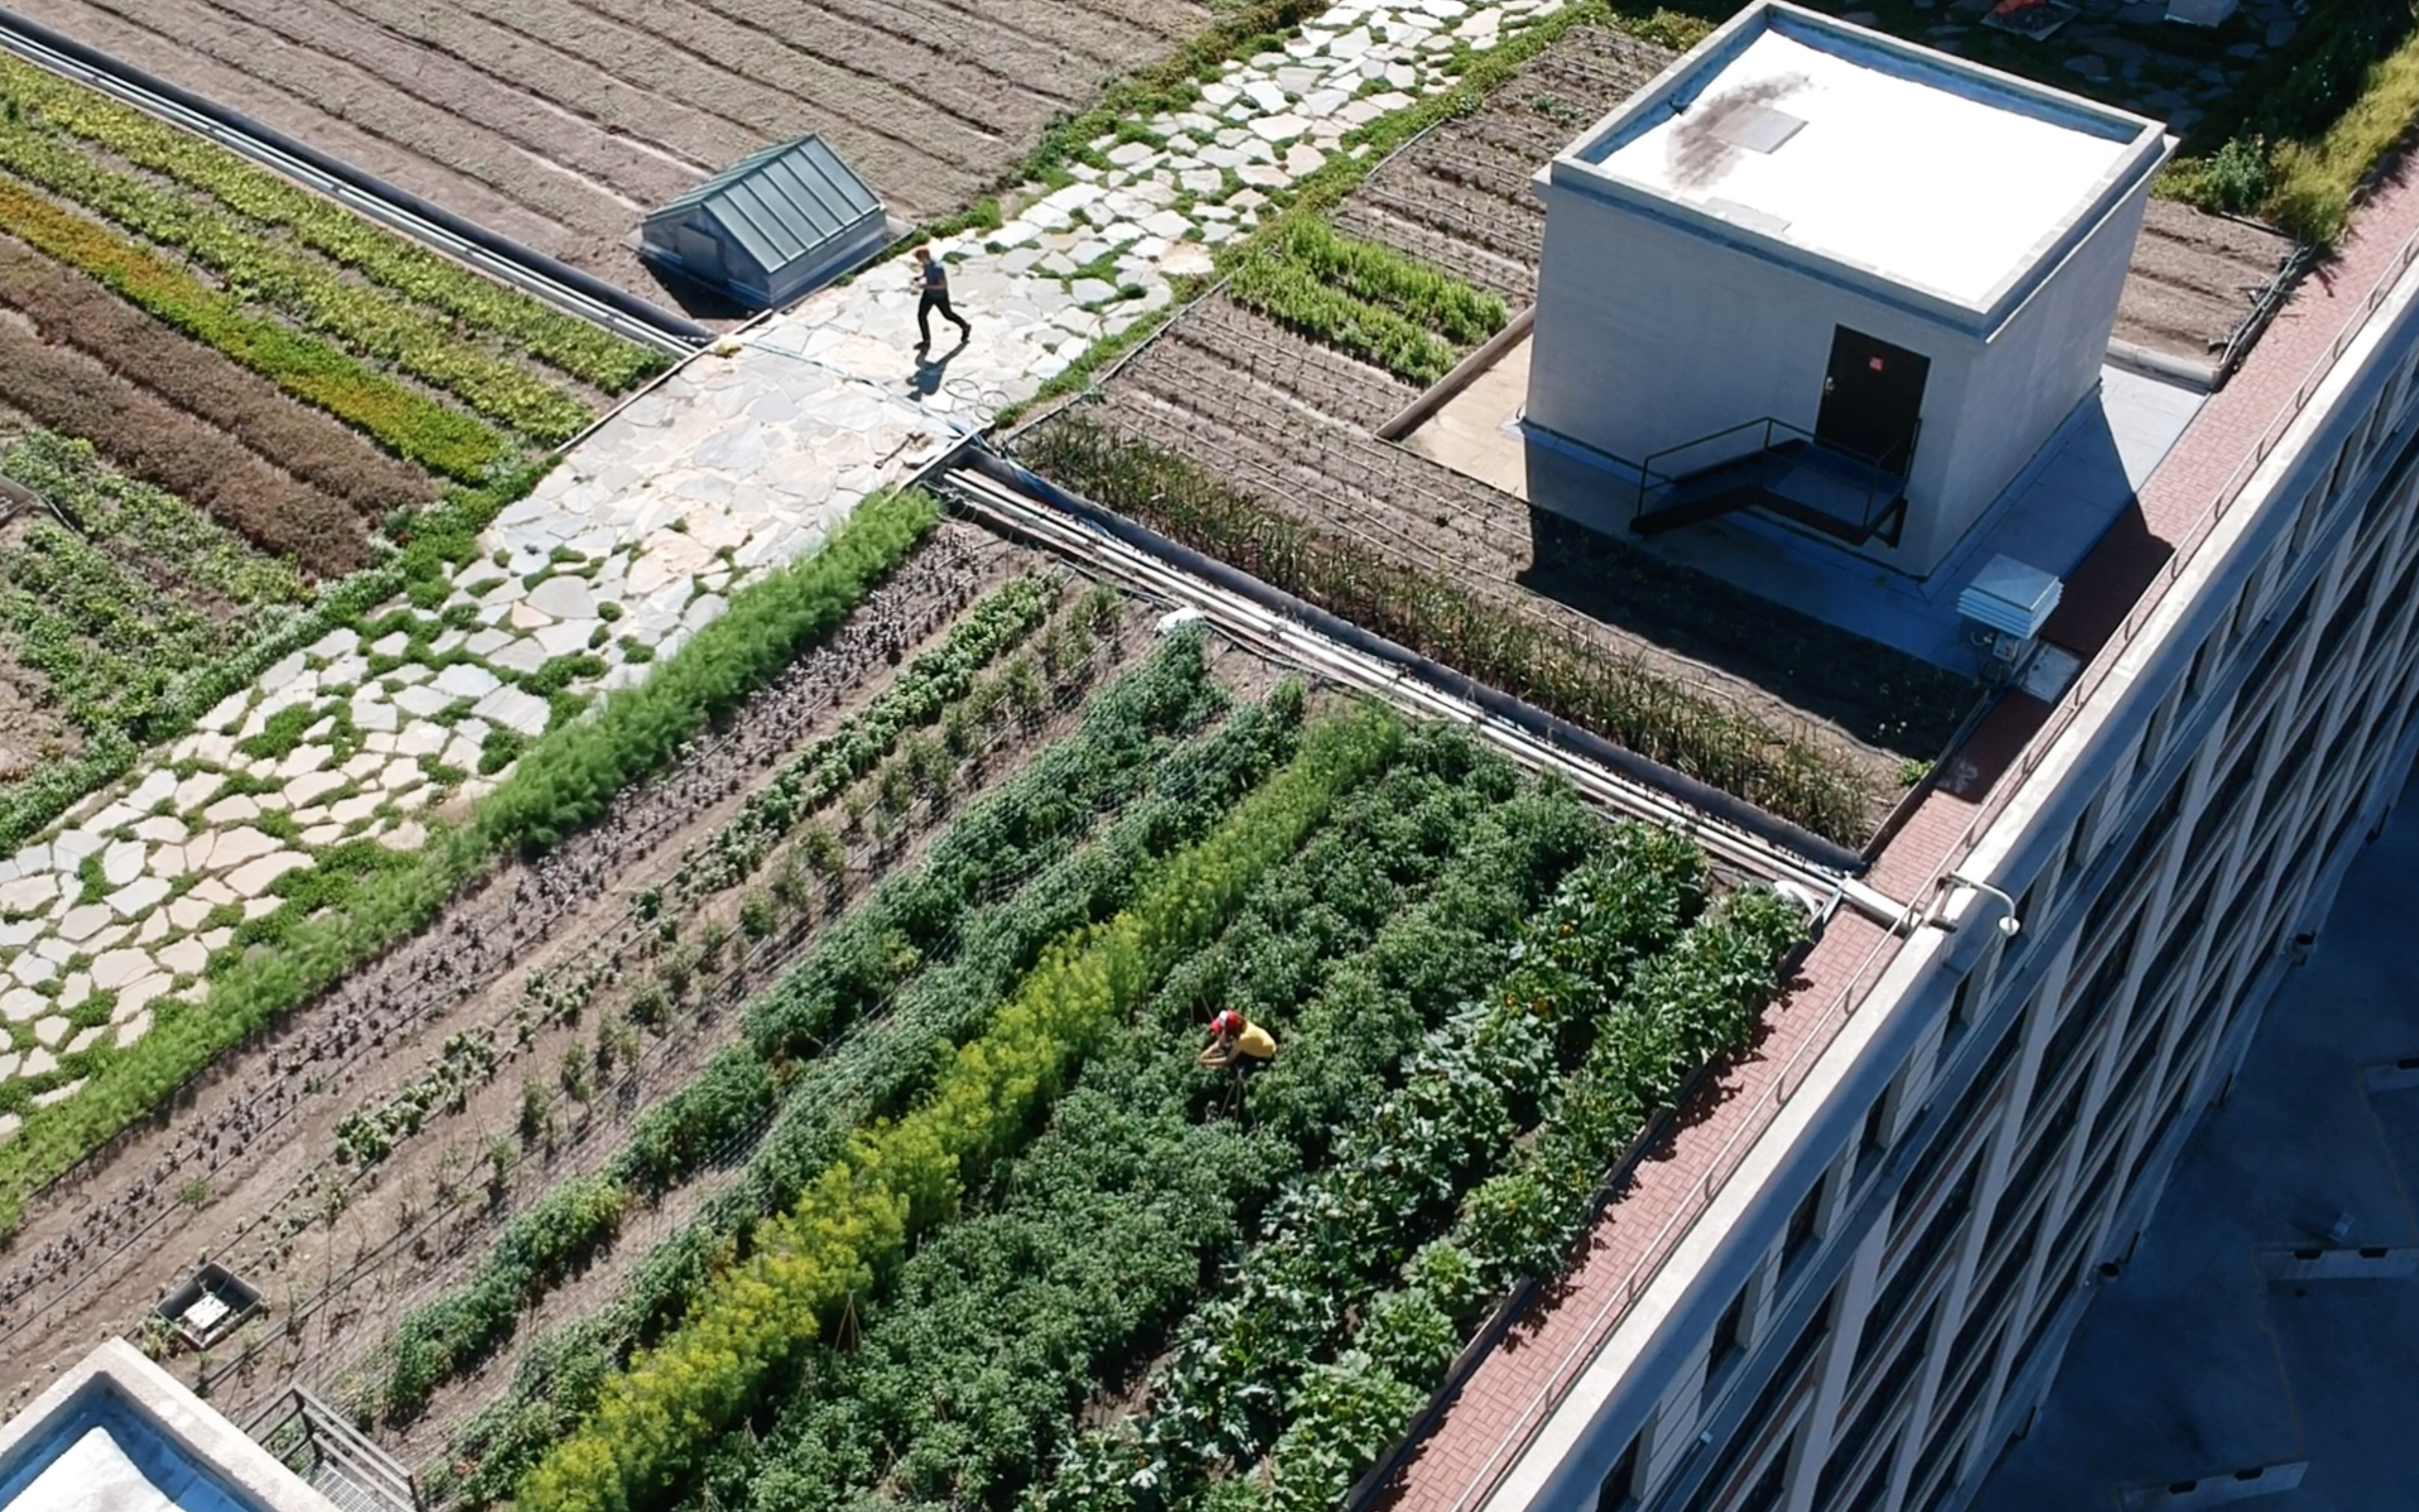 Brooklyn Grange opens NYC's largest rooftop farm in Sunset Park | 6sqft